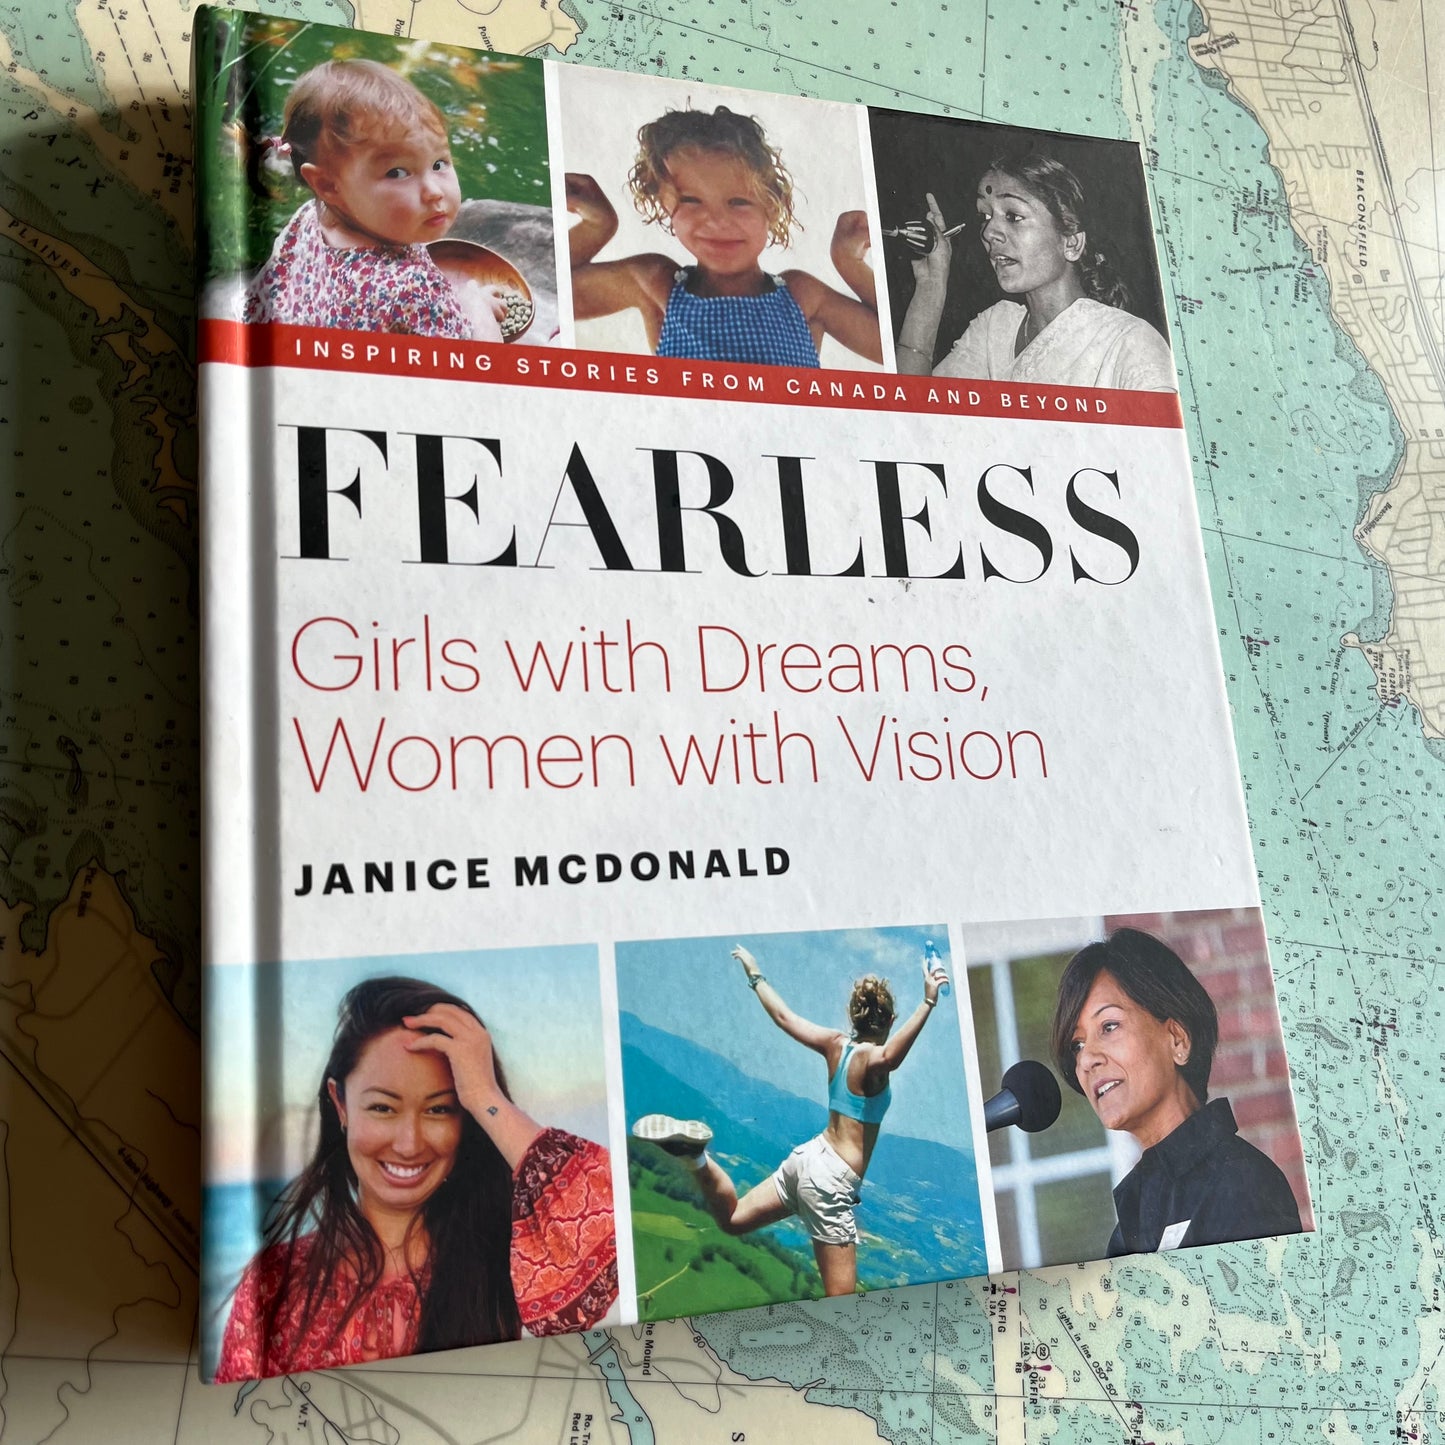 Fearless Girls with Dreams, Women with Vision